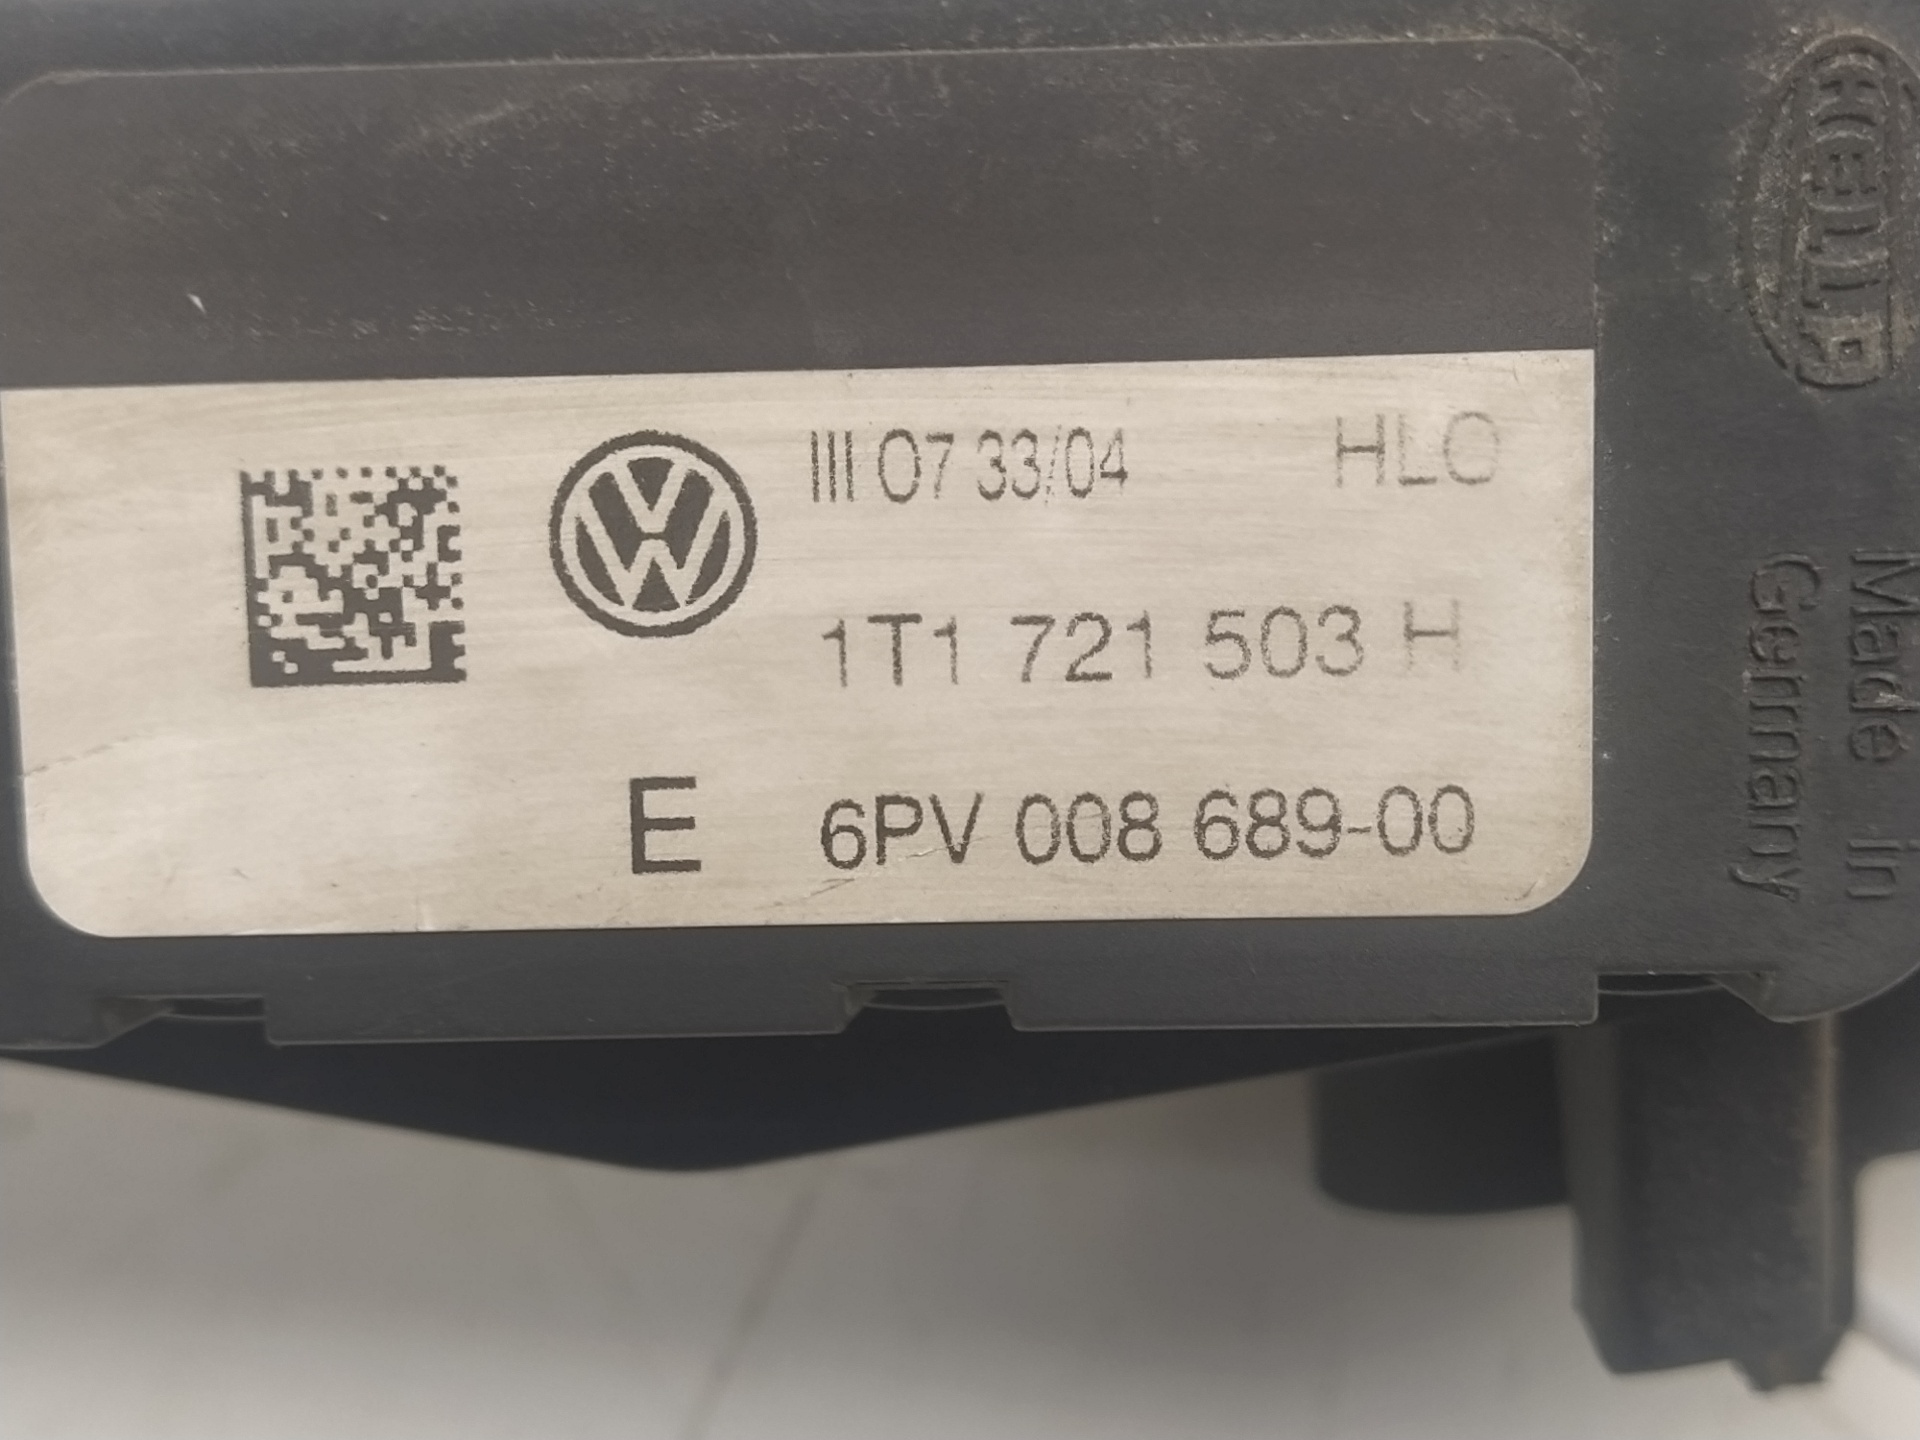 VOLKSWAGEN Caddy 3 generation (2004-2015) Throttle Pedal 1T1721503H, 6PV00868900 22769836